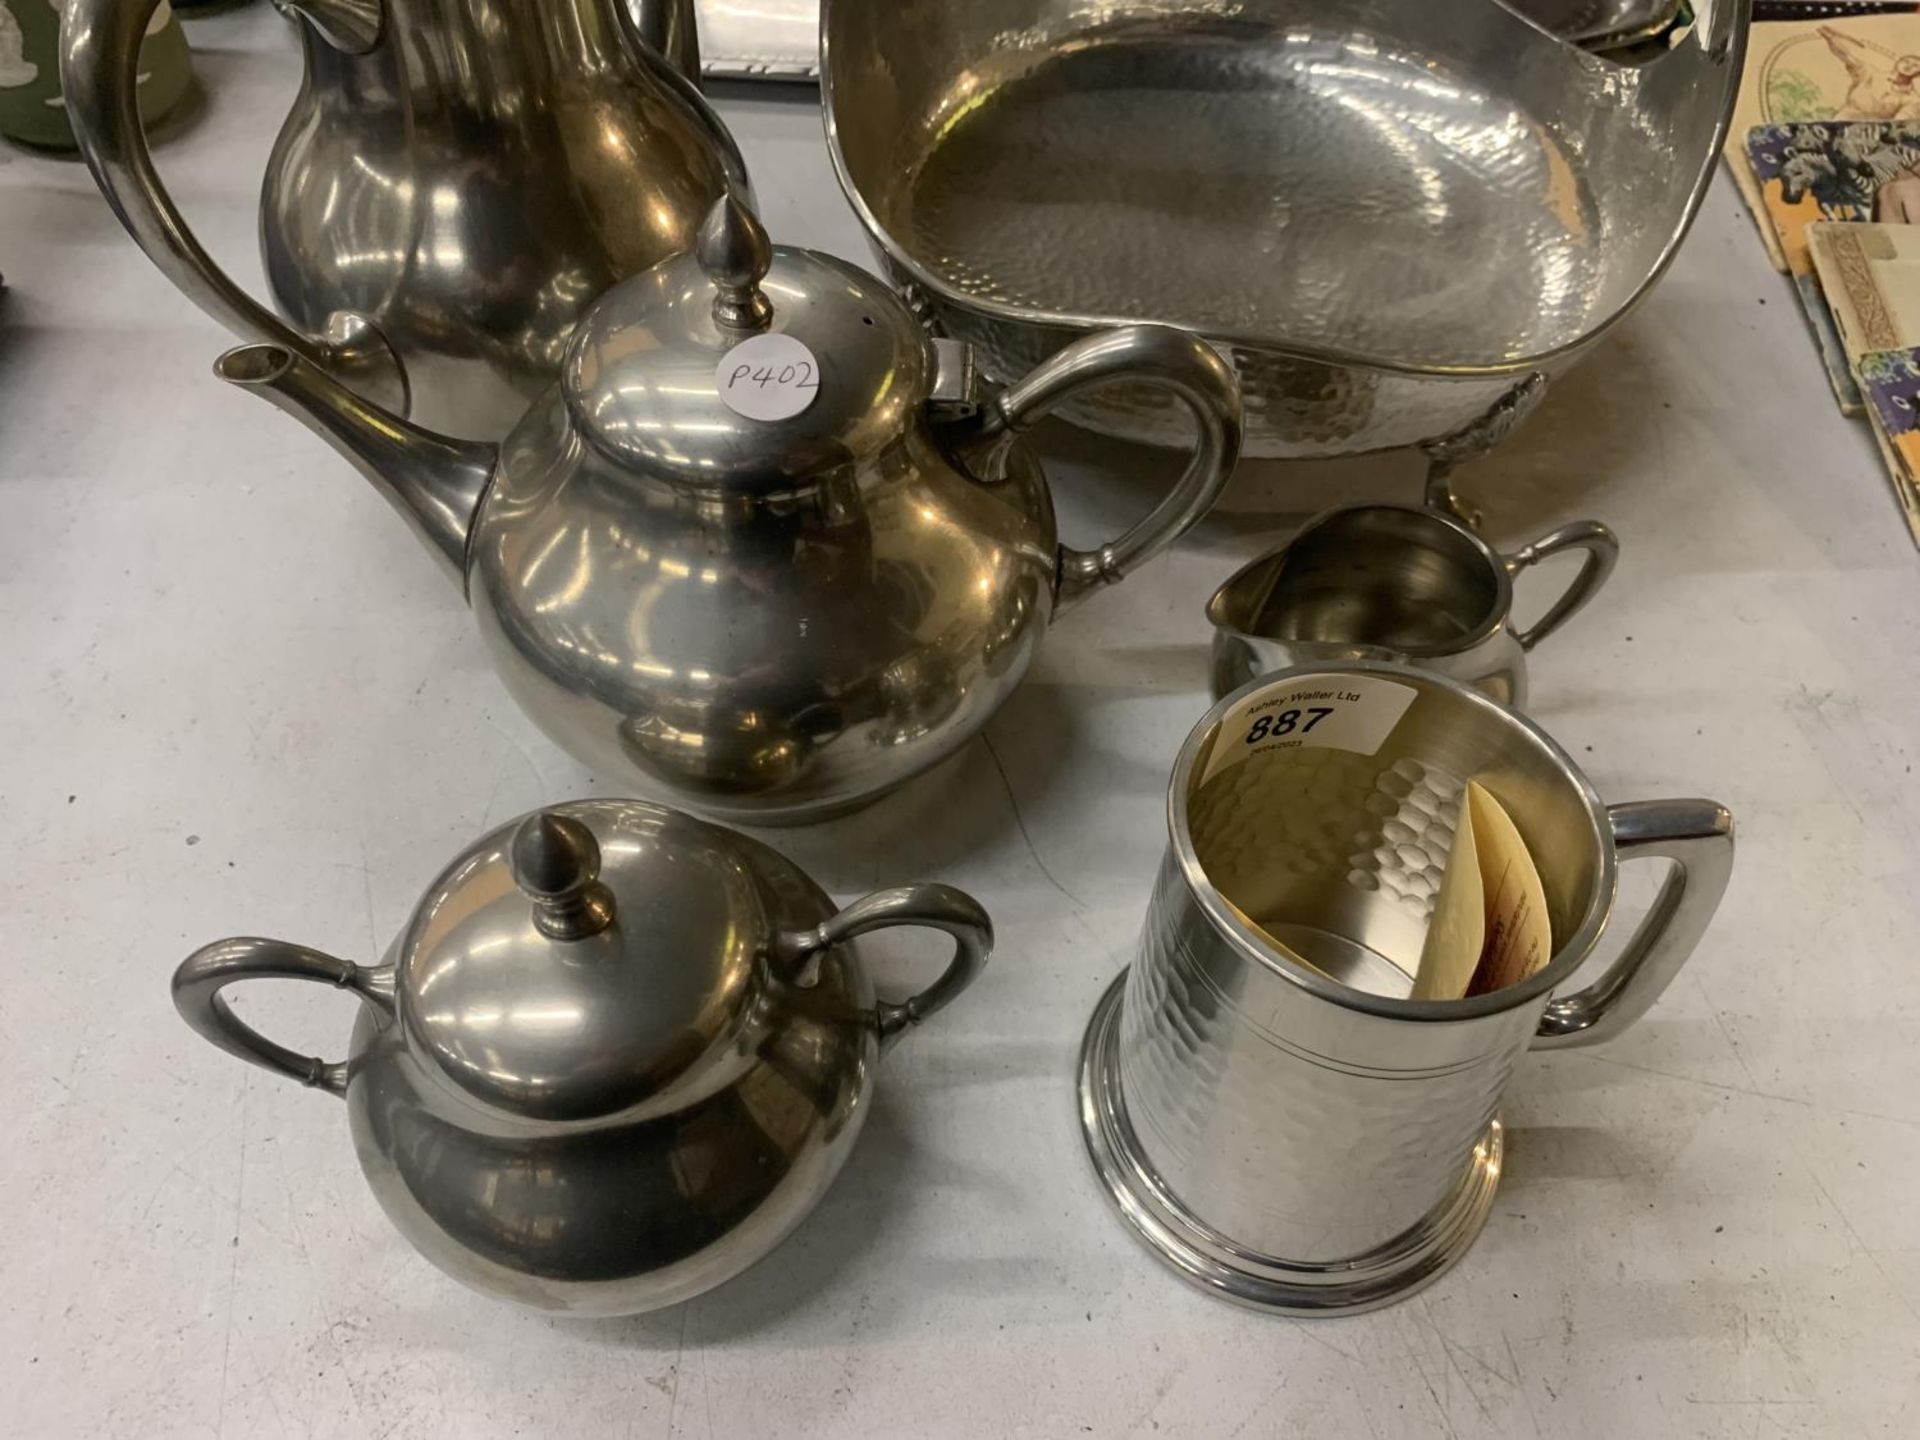 A PEWTER TEASET TO INCLUDE A TEAPOT, HOT WATER POT, CREAM JUG, SUGAR BOWL, A TRAY, LIDDED BASKET - Image 2 of 3